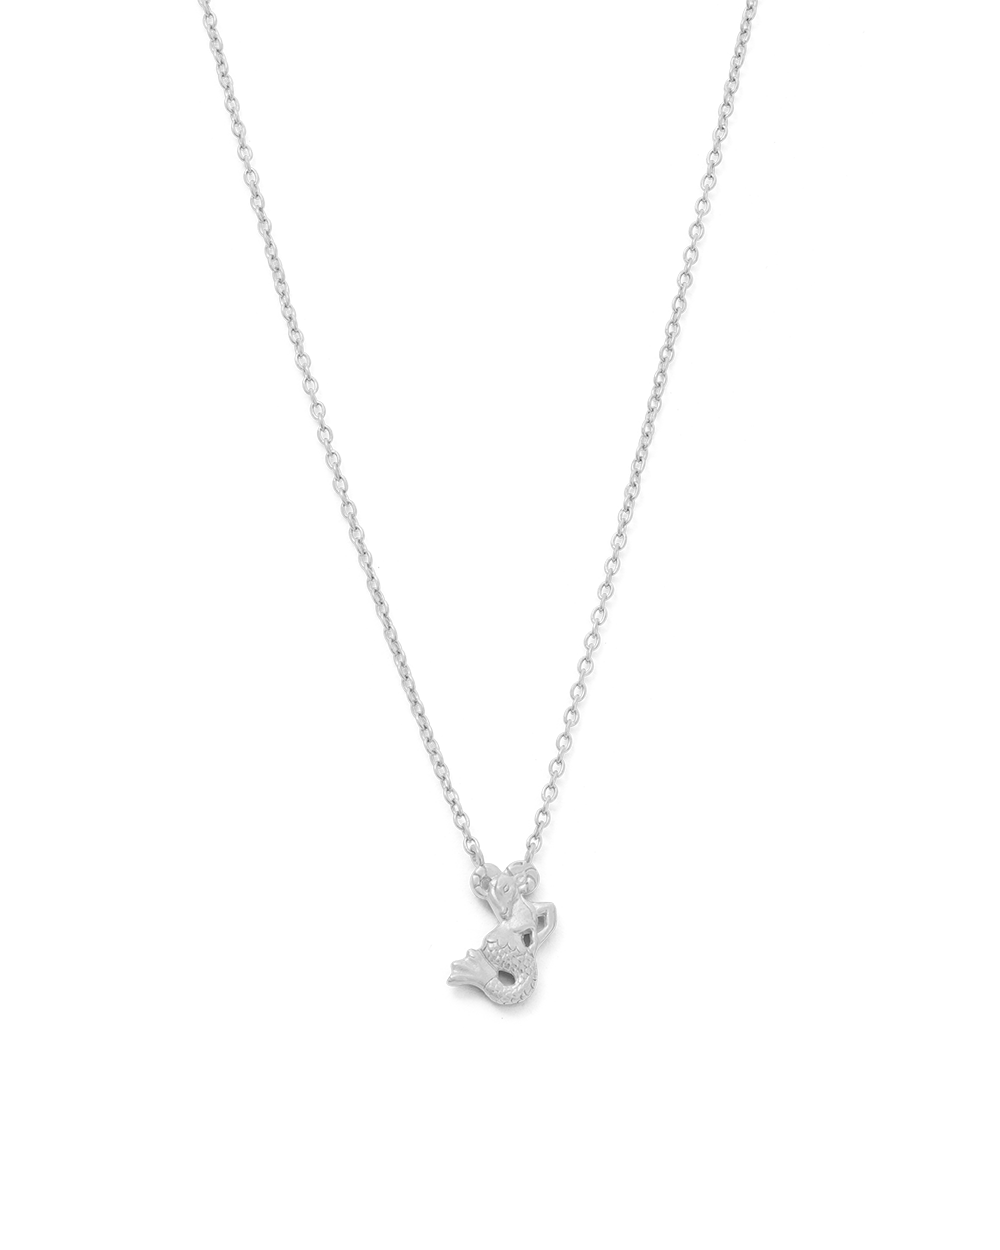 CAPRICORN STAR SIGN NECKLACE (STERLING SILVER)